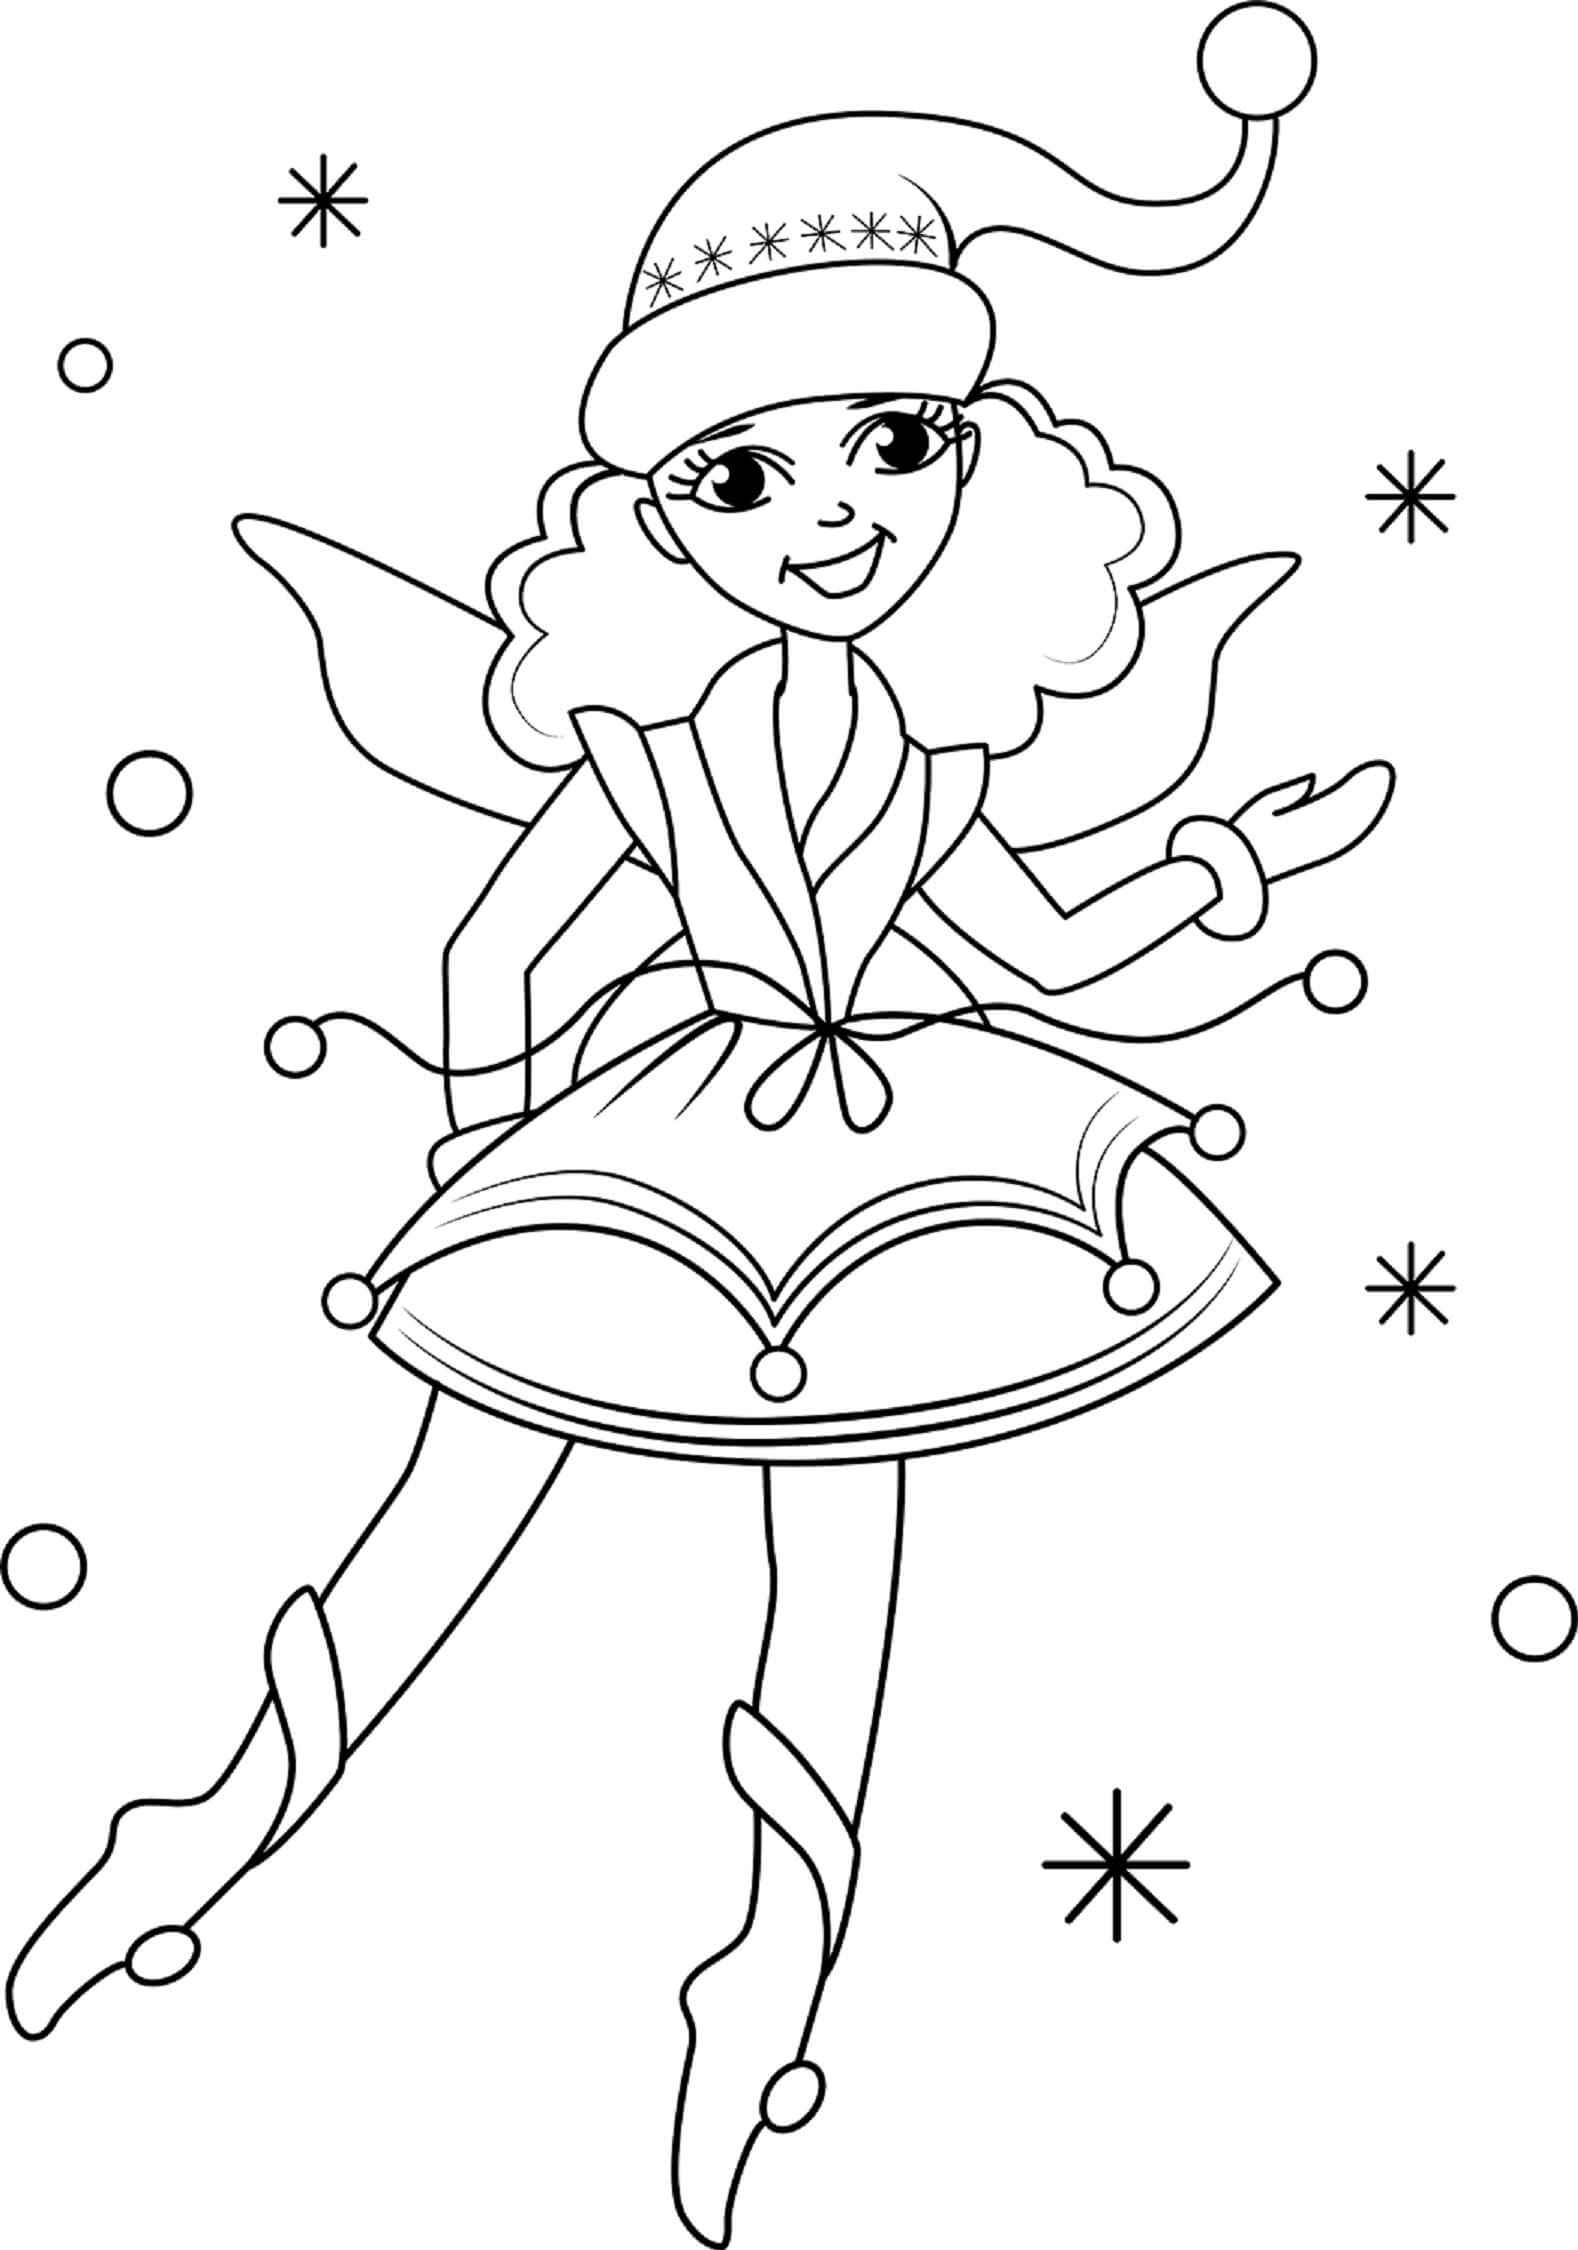 Fairy In Christmas coloring page - Download, Print or Color Online for Free